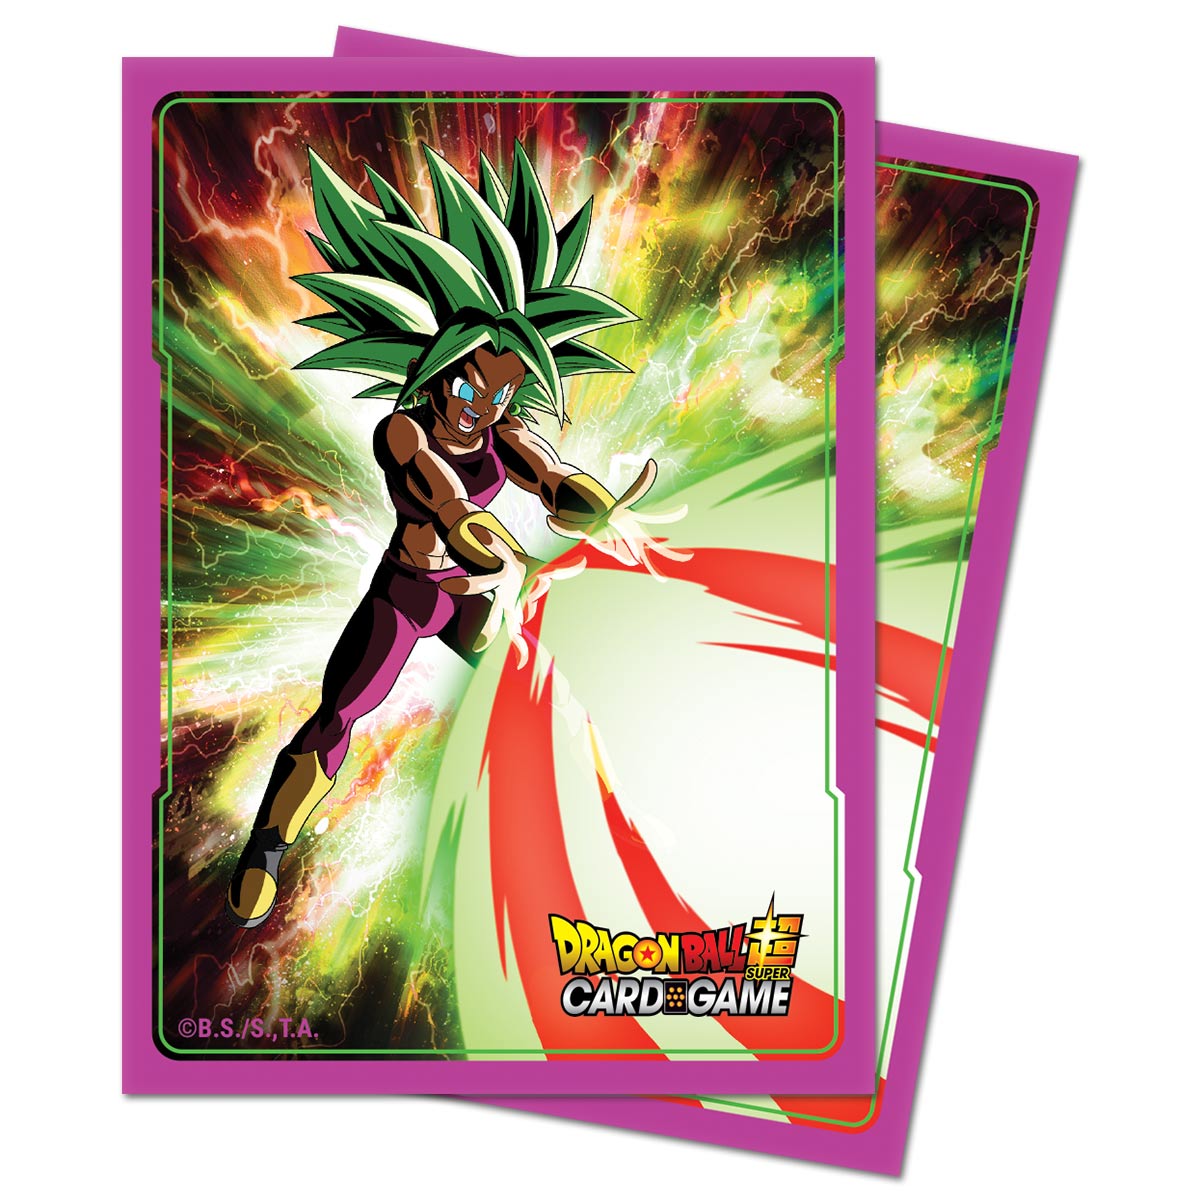 Broly Standard Deck Protector Sleeves (65ct) for Dragon Ball Super